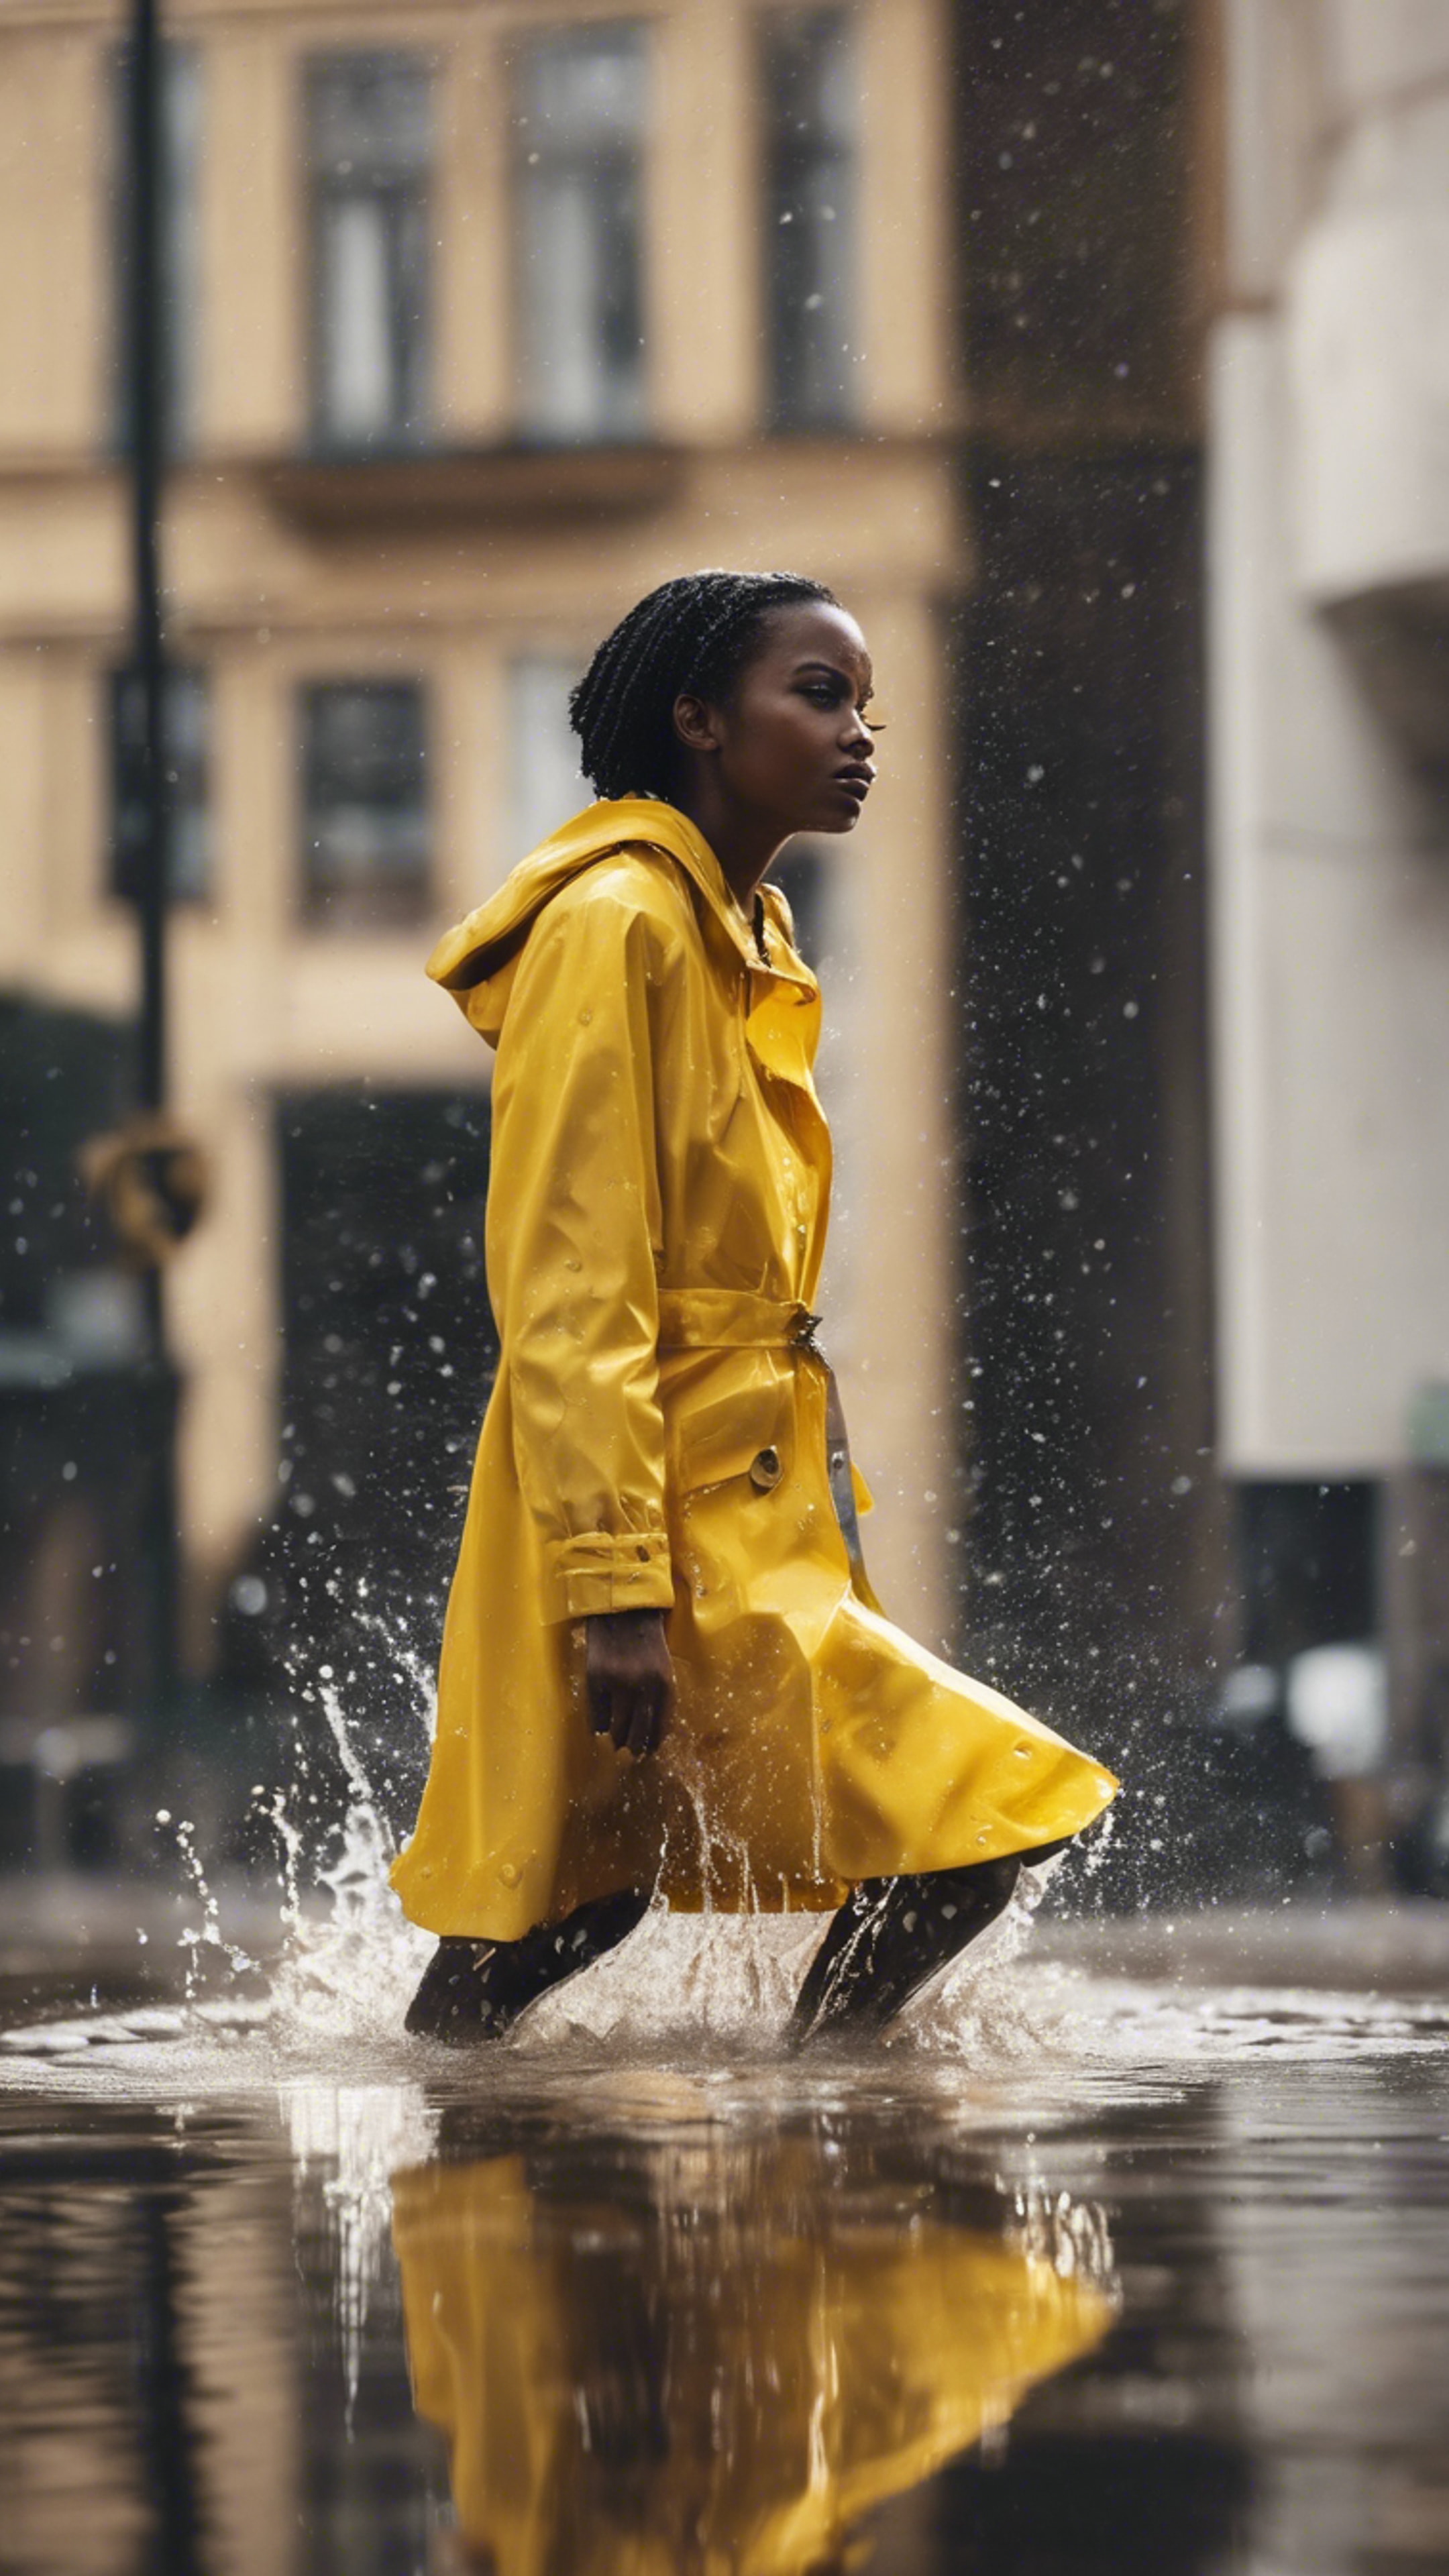 A black girl in a bright yellow raincoat splashing water in puddles after a heavy rain. کاغذ دیواری[a80398e4c066404db875]